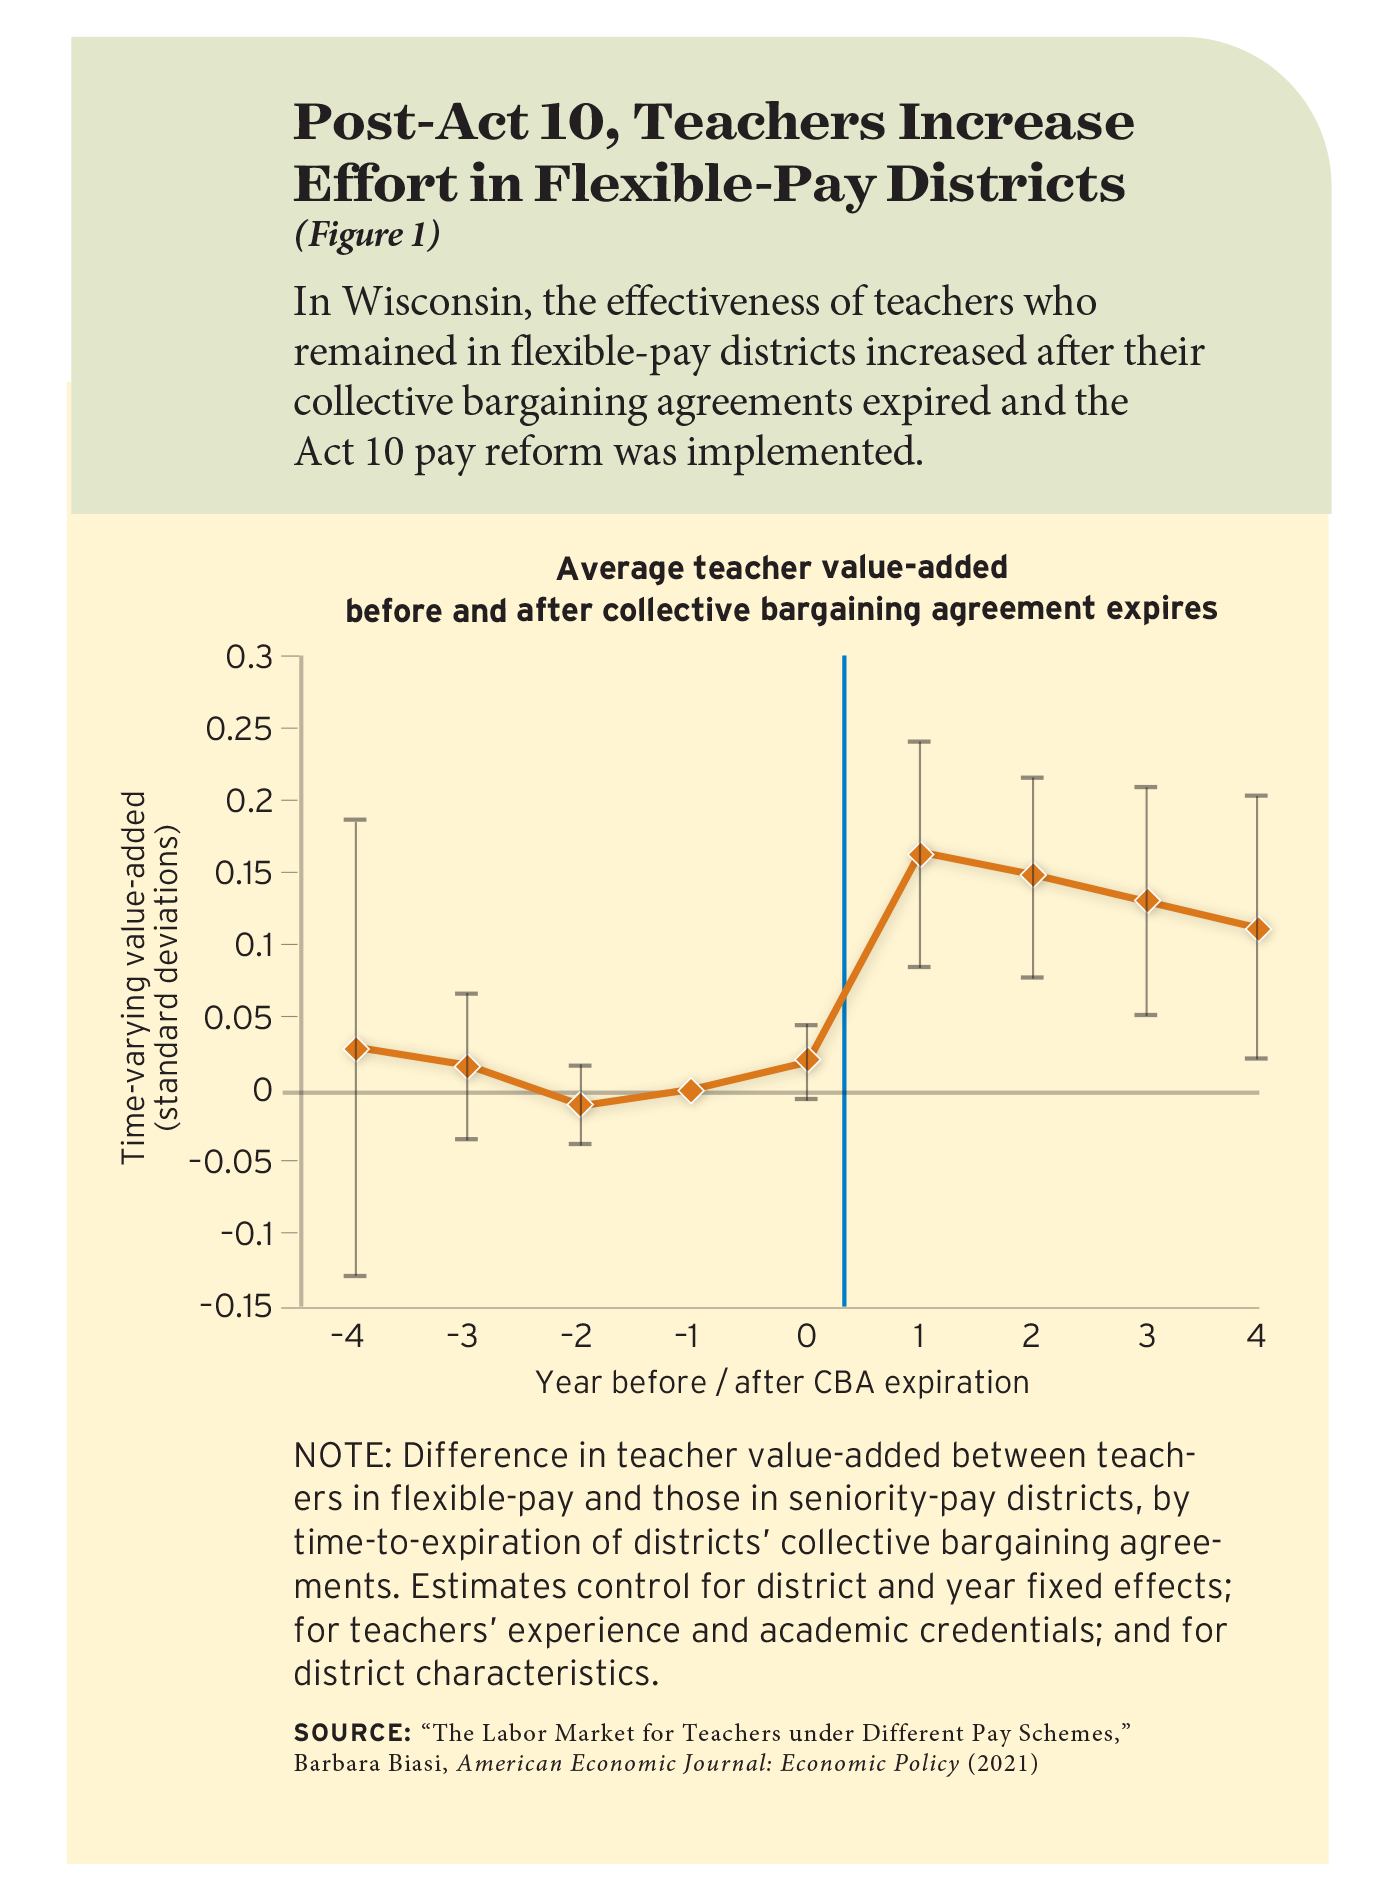 Figure 1: Post-Act 10, Teachers Increase Effort in Flexible-Pay Districts